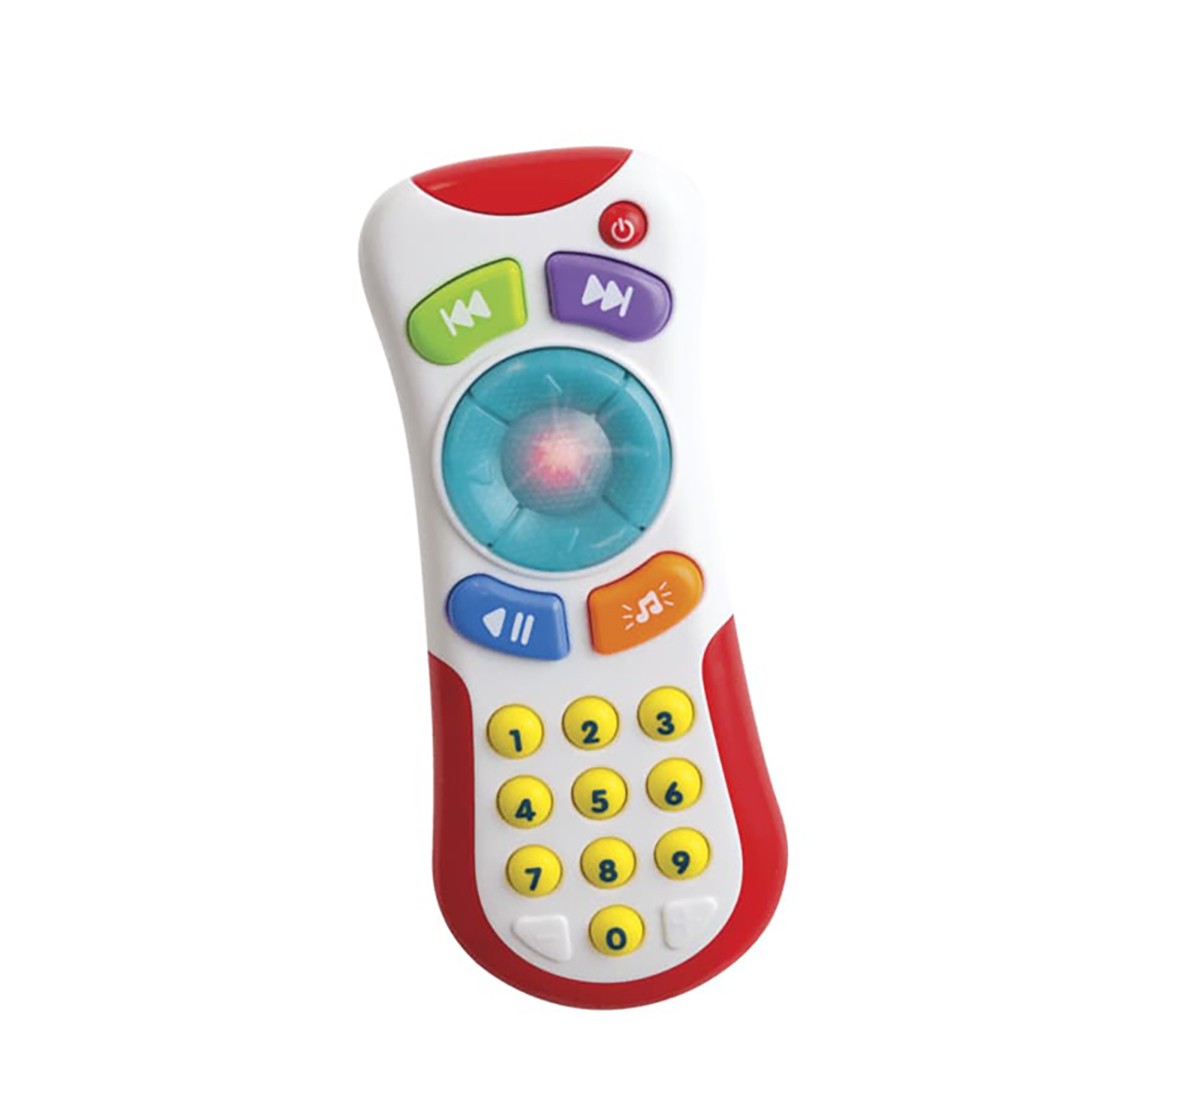 Winfun -Light N Sounds Remote Learning Toys for Kids age 6M+ 